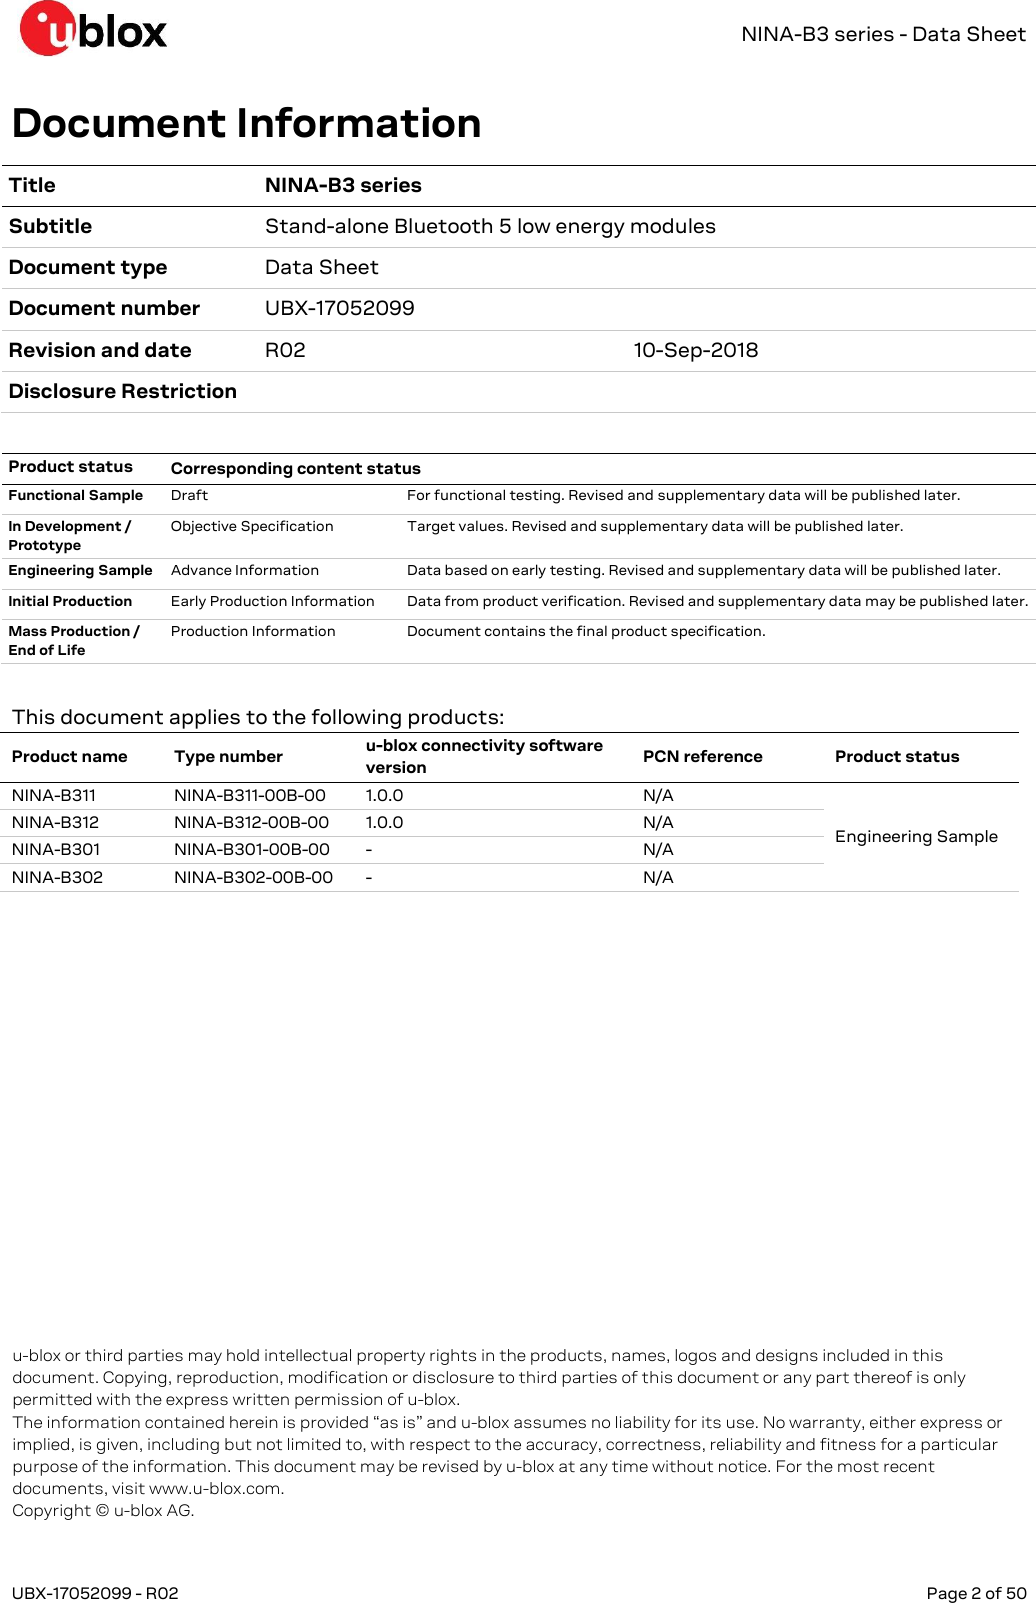   NINA-B3 series - Data Sheet UBX-17052099 - R02  Page 2 of 50      Document Information Title NINA-B3 series Subtitle Stand-alone Bluetooth 5 low energy modules Document type Data Sheet Document number UBX-17052099  Revision and date R02 10-Sep-2018 Disclosure Restriction   Product status Corresponding content status  Functional Sample Draft For functional testing. Revised and supplementary data will be published later. In Development / Prototype Objective Specification Target values. Revised and supplementary data will be published later. Engineering Sample Advance Information Data based on early testing. Revised and supplementary data will be published later. Initial Production Early Production Information Data from product verification. Revised and supplementary data may be published later. Mass Production /  End of Life Production Information Document contains the final product specification.  This document applies to the following products: Product name Type number u-blox connectivity software version PCN reference Product status NINA-B311 NINA-B311-00B-00 1.0.0 N/A Engineering Sample NINA-B312 NINA-B312-00B-00 1.0.0 N/A NINA-B301 NINA-B301-00B-00 - N/A NINA-B302 NINA-B302-00B-00 - N/A    u-blox or third parties may hold intellectual property rights in the products, names, logos and designs included in this document. Copying, reproduction, modification or disclosure to third parties of this document or any part thereof is only permitted with the express written permission of u-blox. The information contained herein is provided “as is” and u-blox assumes no liability for its use. No warranty, either express or implied, is given, including but not limited to, with respect to the accuracy, correctness, reliability and fitness for a particular purpose of the information. This document may be revised by u-blox at any time without notice. For the most recent documents, visit www.u-blox.com.  Copyright © u-blox AG. 